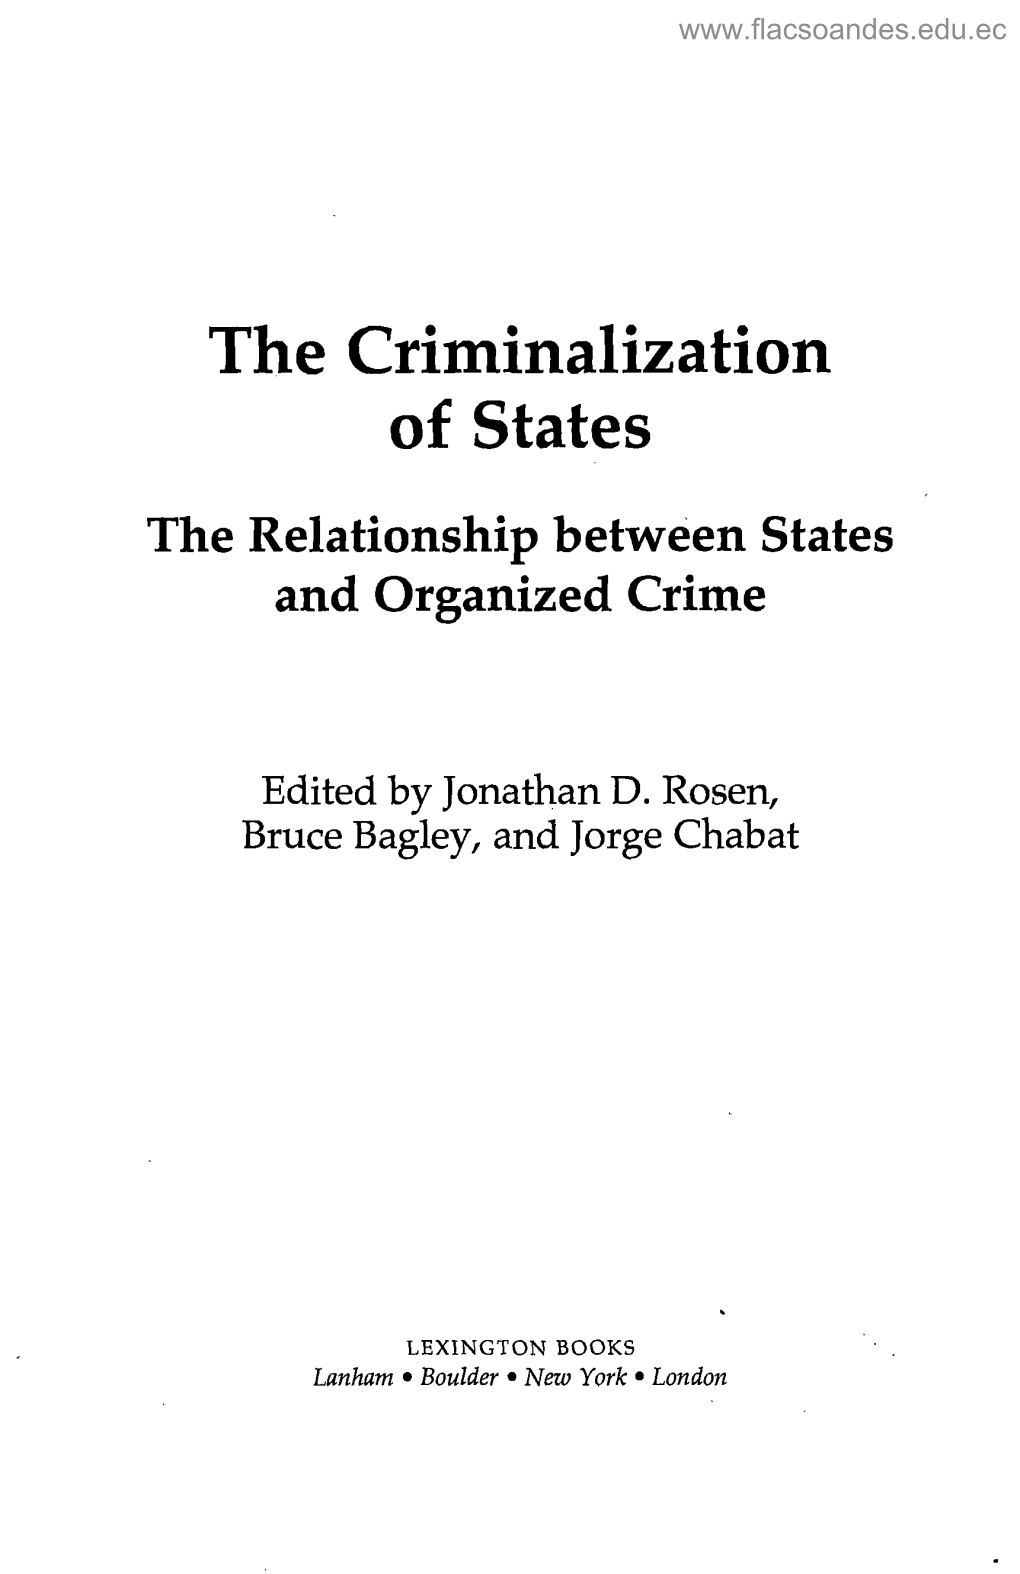 The Criminalization of States the Relationship Between States and Organized Crime